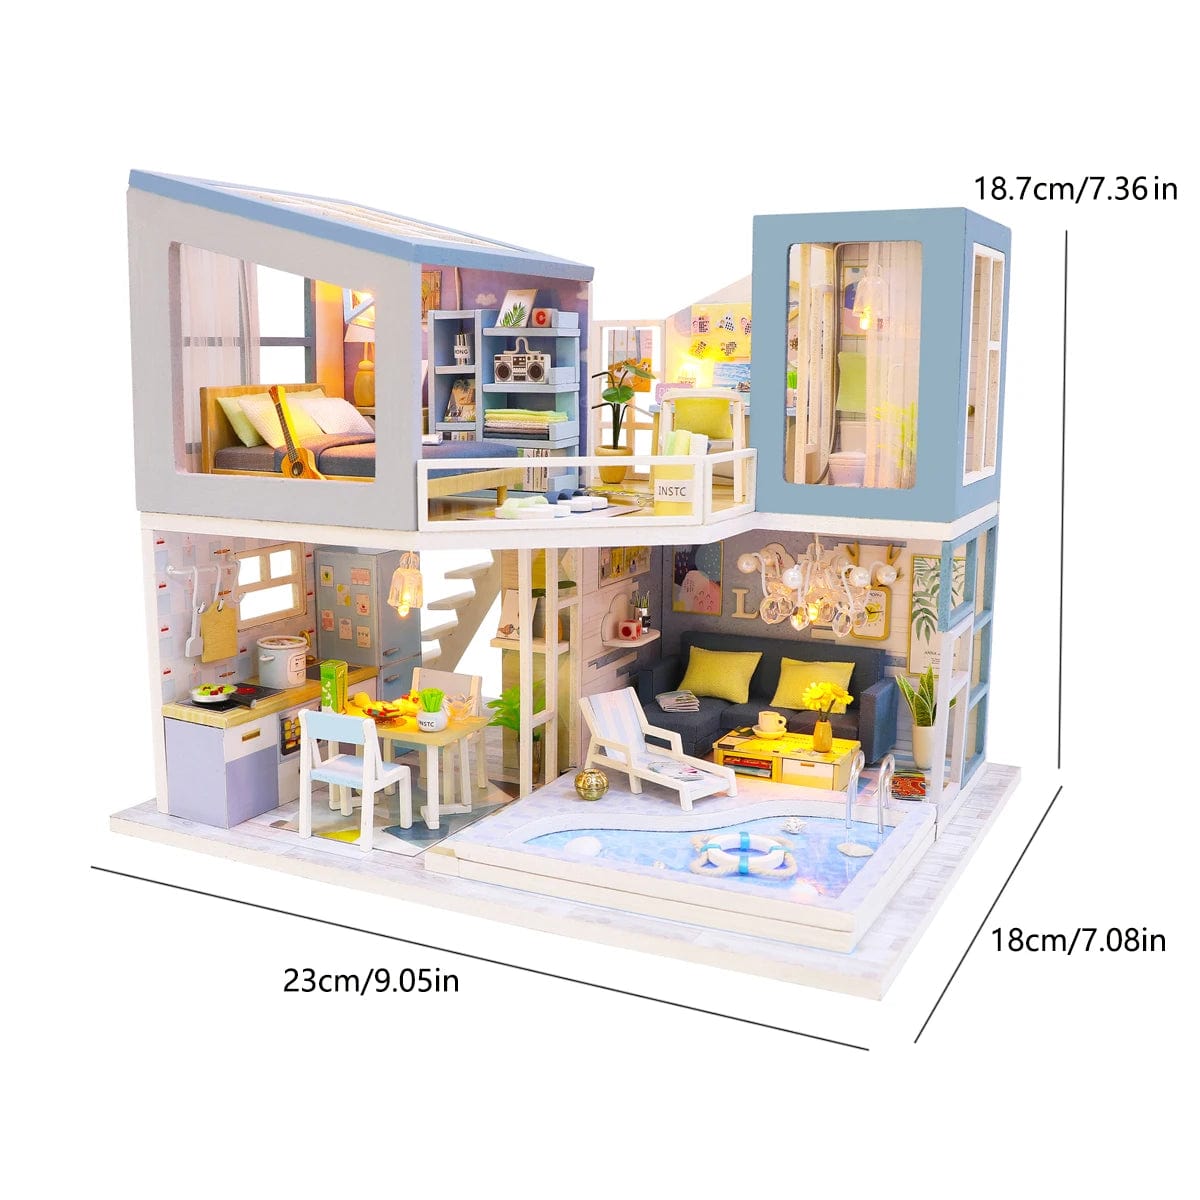 Pièces d'Exceptions Baby House Kit Mini DIY Handmade 3D Puzzle Assembly Building Villa Model Toys, Home Bedroom Decoration with Furniture Wooden Cra